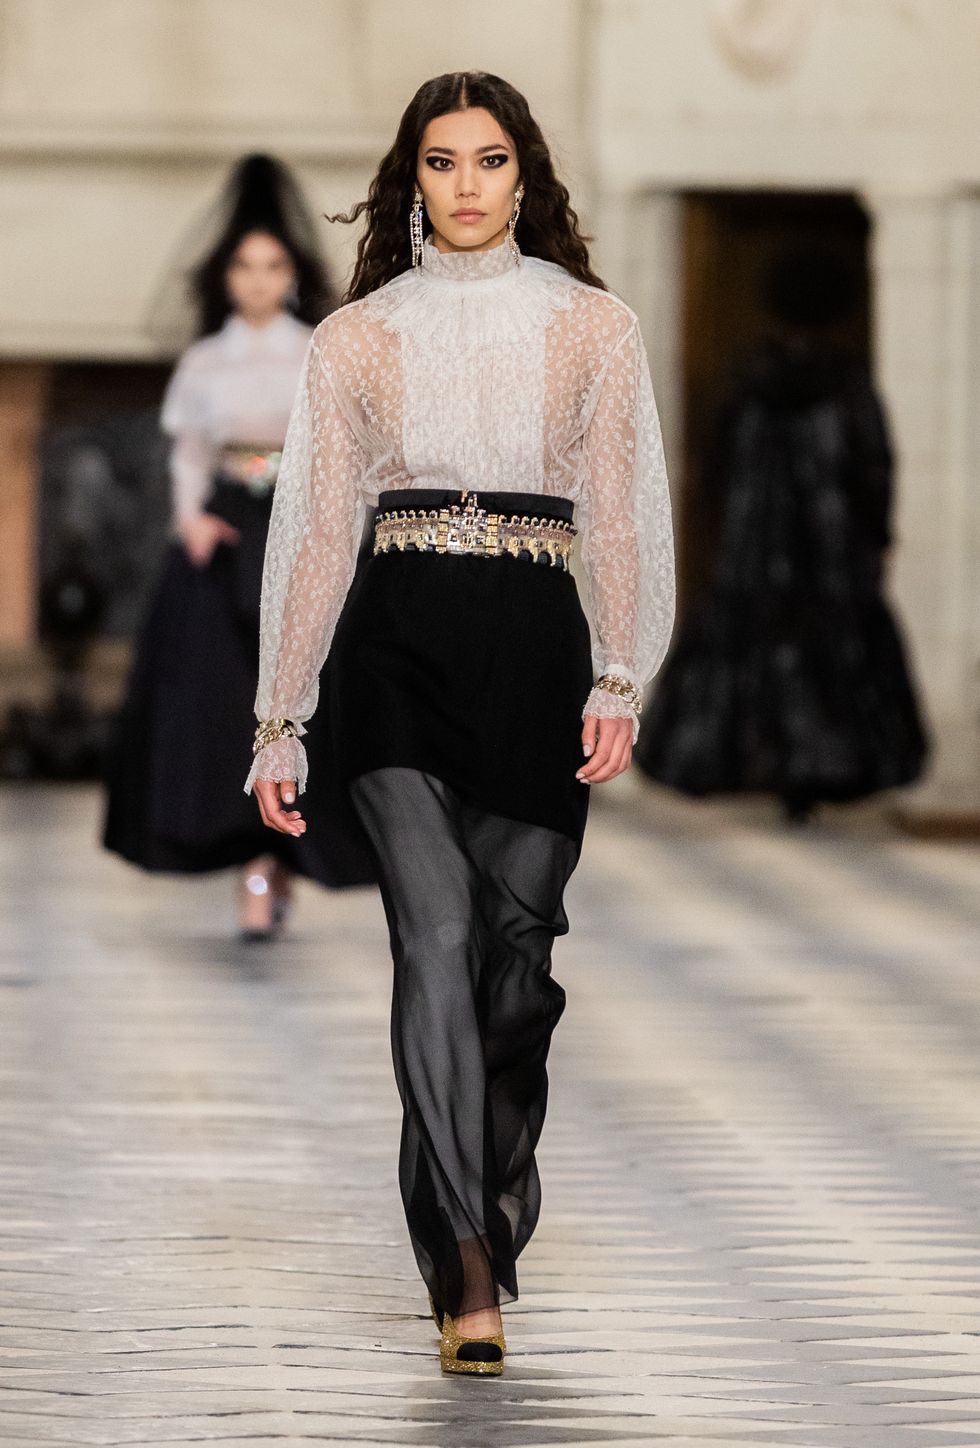 Lace tights and leather skirts: Style tips to take away from Chanel's  Metiers d'Art show